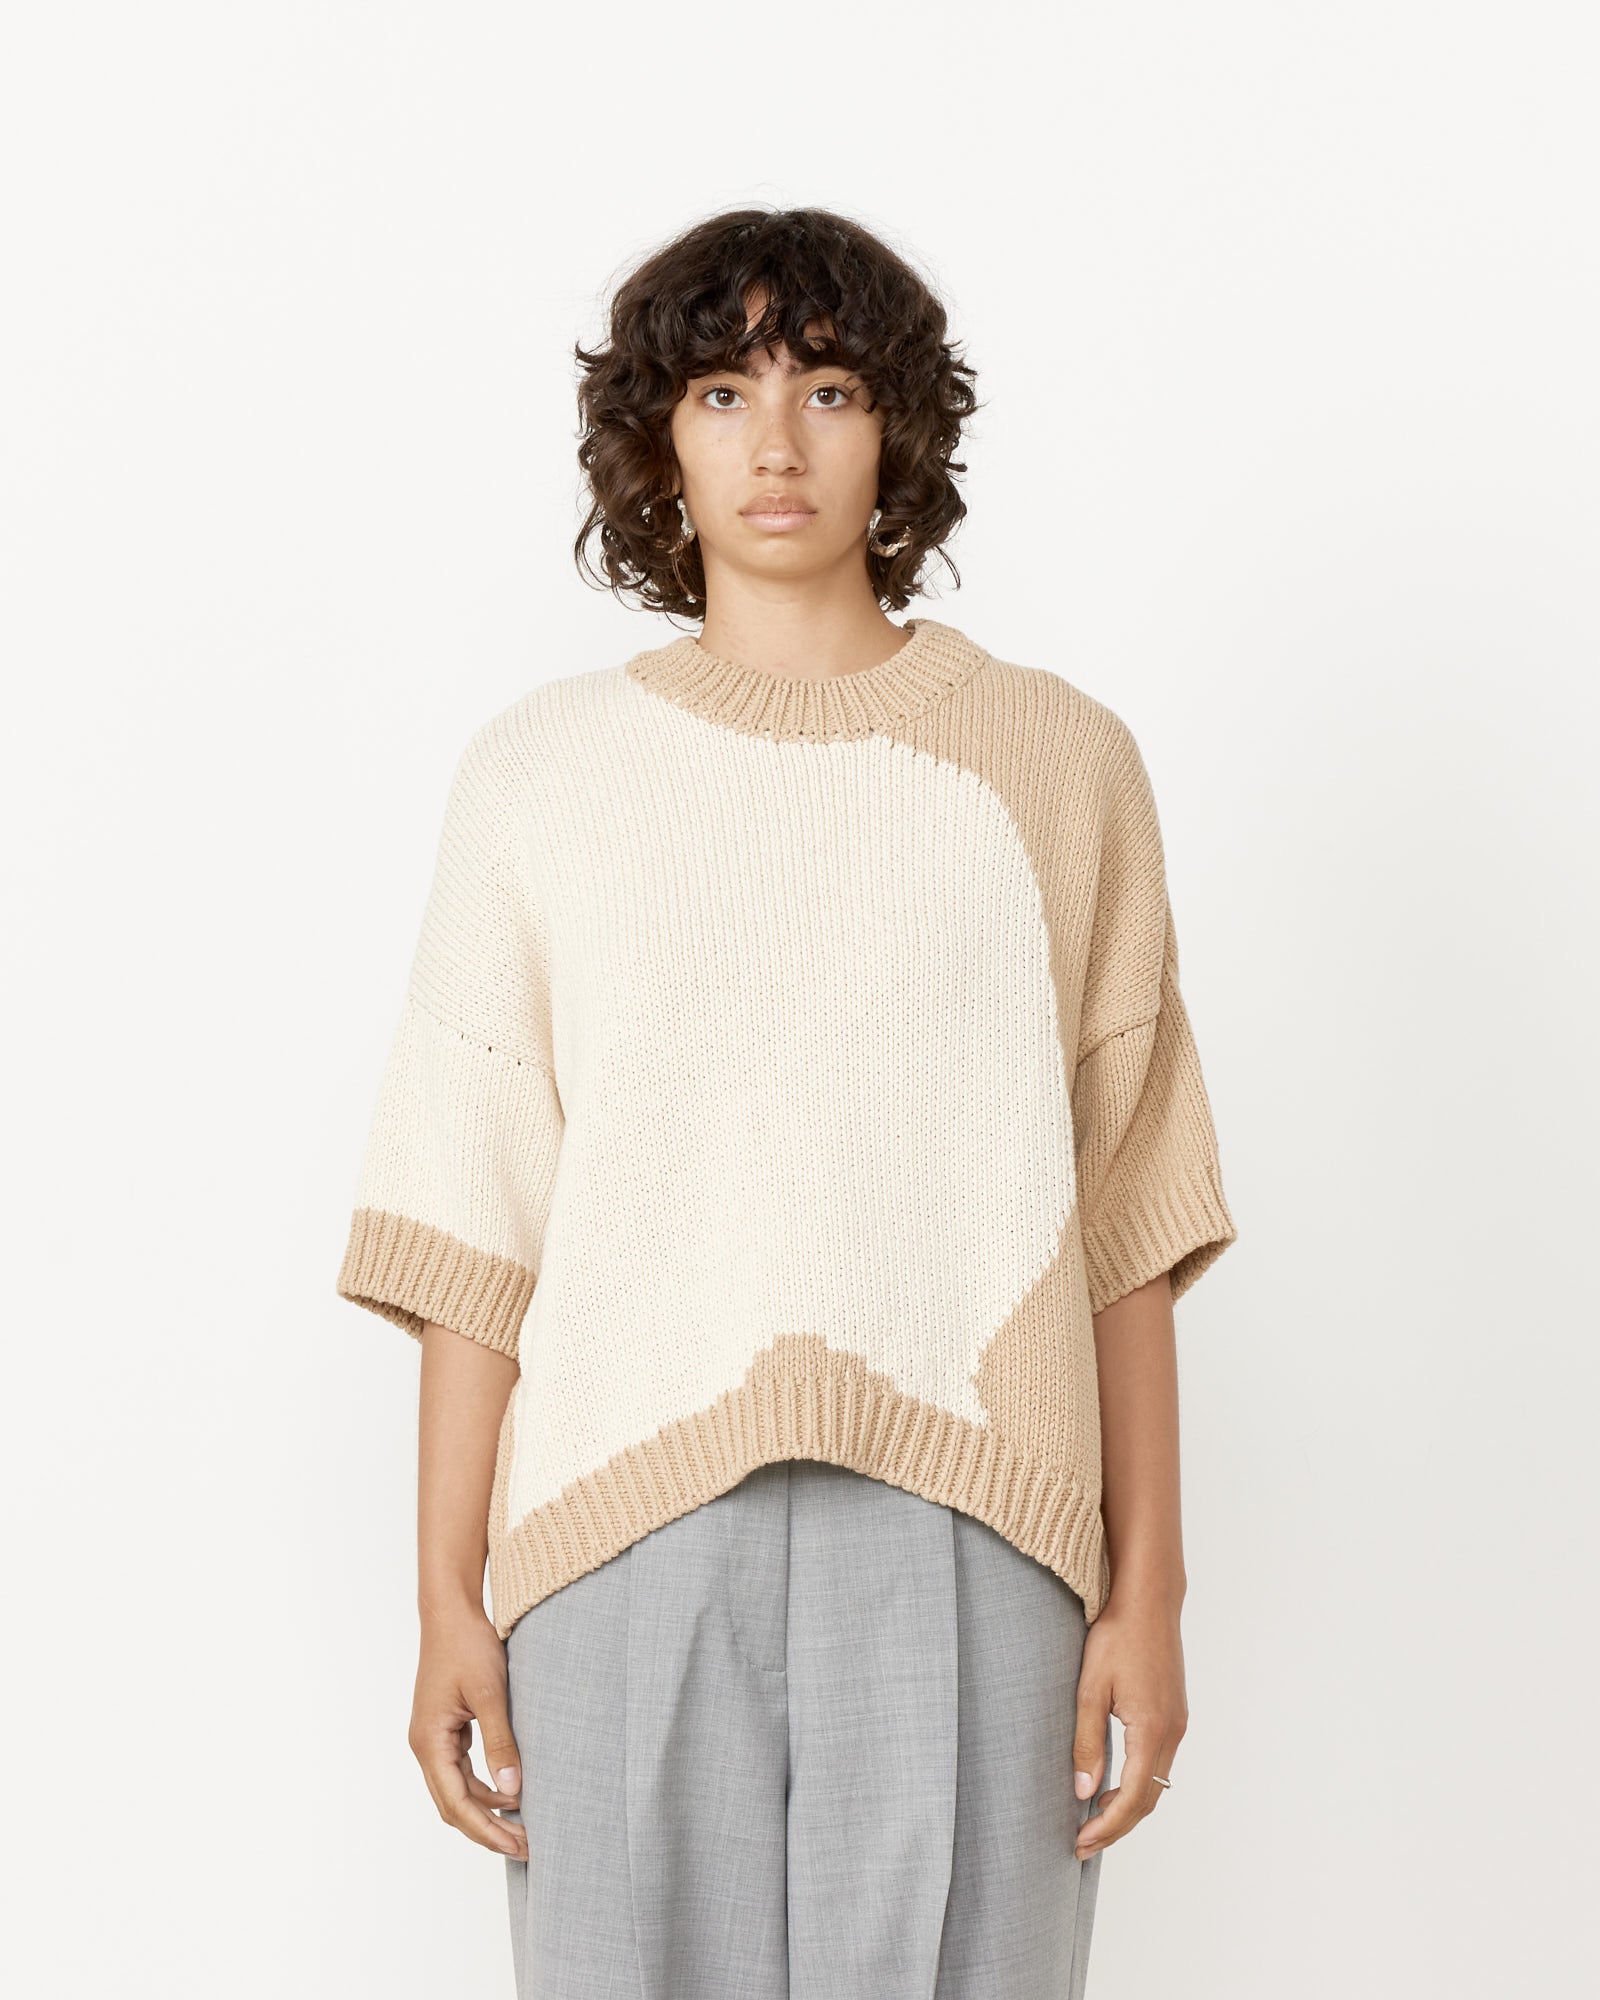 Cotton Sweater in Taupe Bicolor